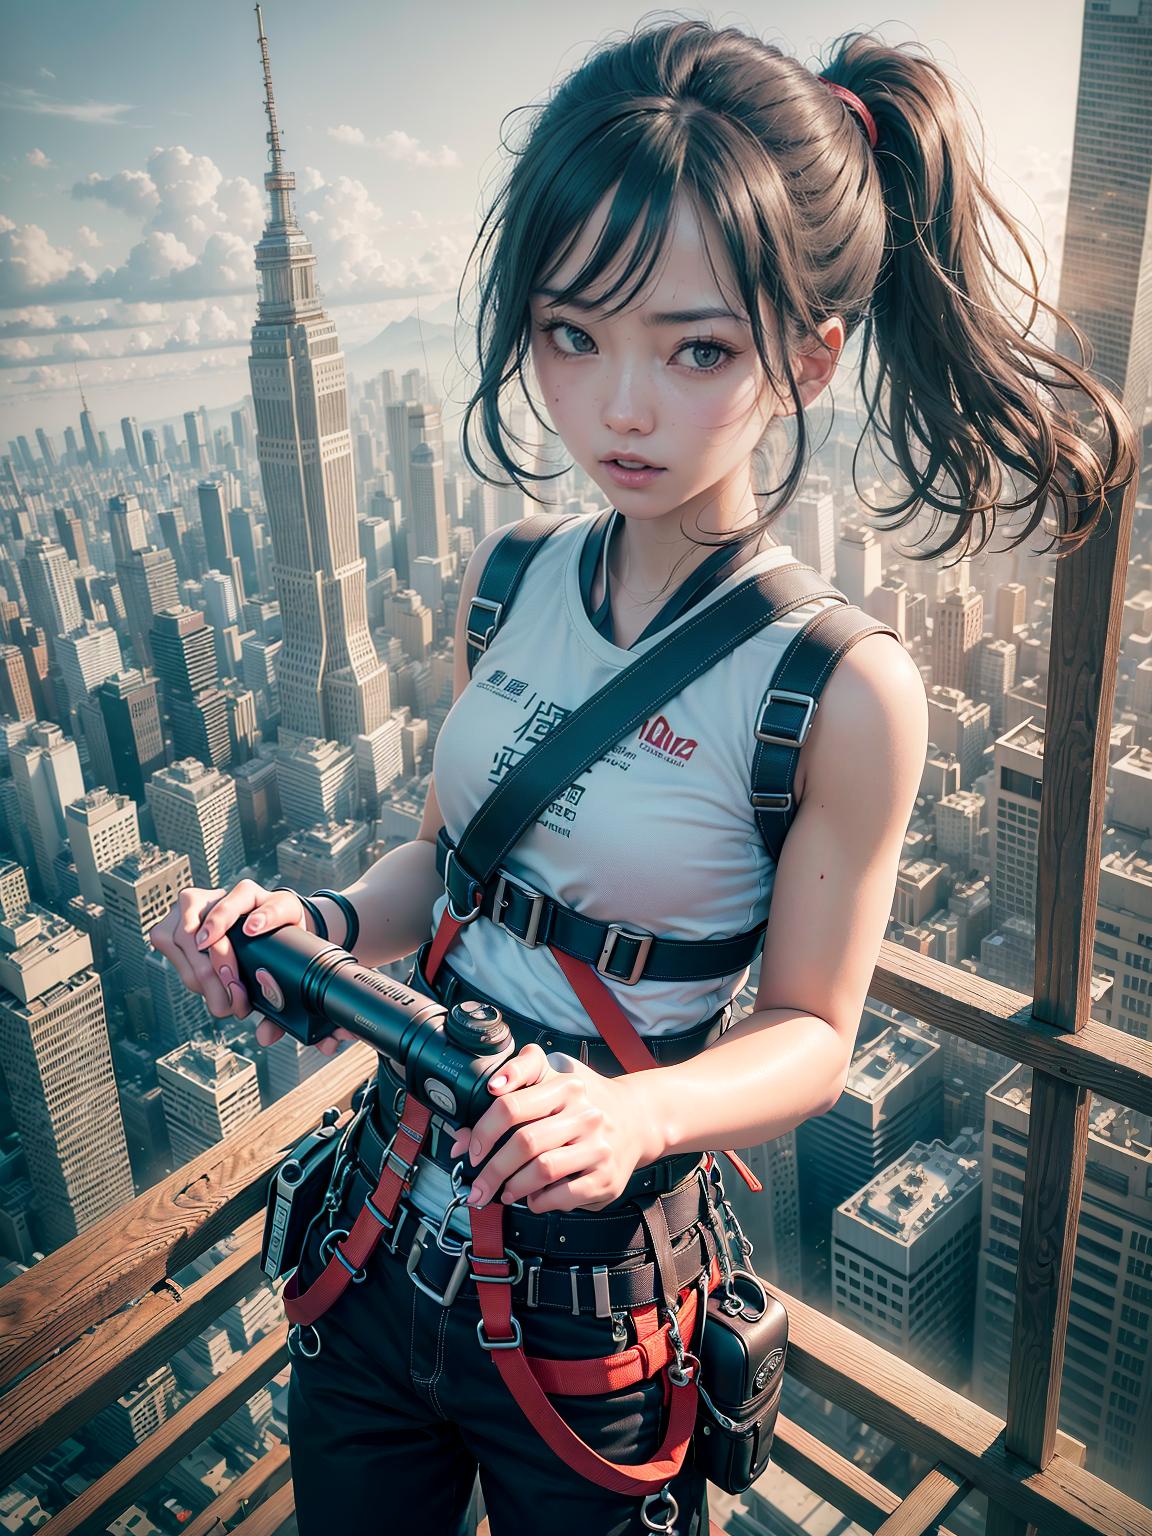  master piece, best quality, ultra detailed, highres, 4k.8k, Climber., Climbing, reaching the top, looking down, posing for a photo., Focused and determined., BREAK A climber conquering Tokyo Tower., Tokyo Tower observation deck., Rope, harness, climbing gear, camera., BREAK Elevated, urban, adventurous., Sunlight, clear sky, cityscape backdrop, feeling of accomplishment., fantasy00d